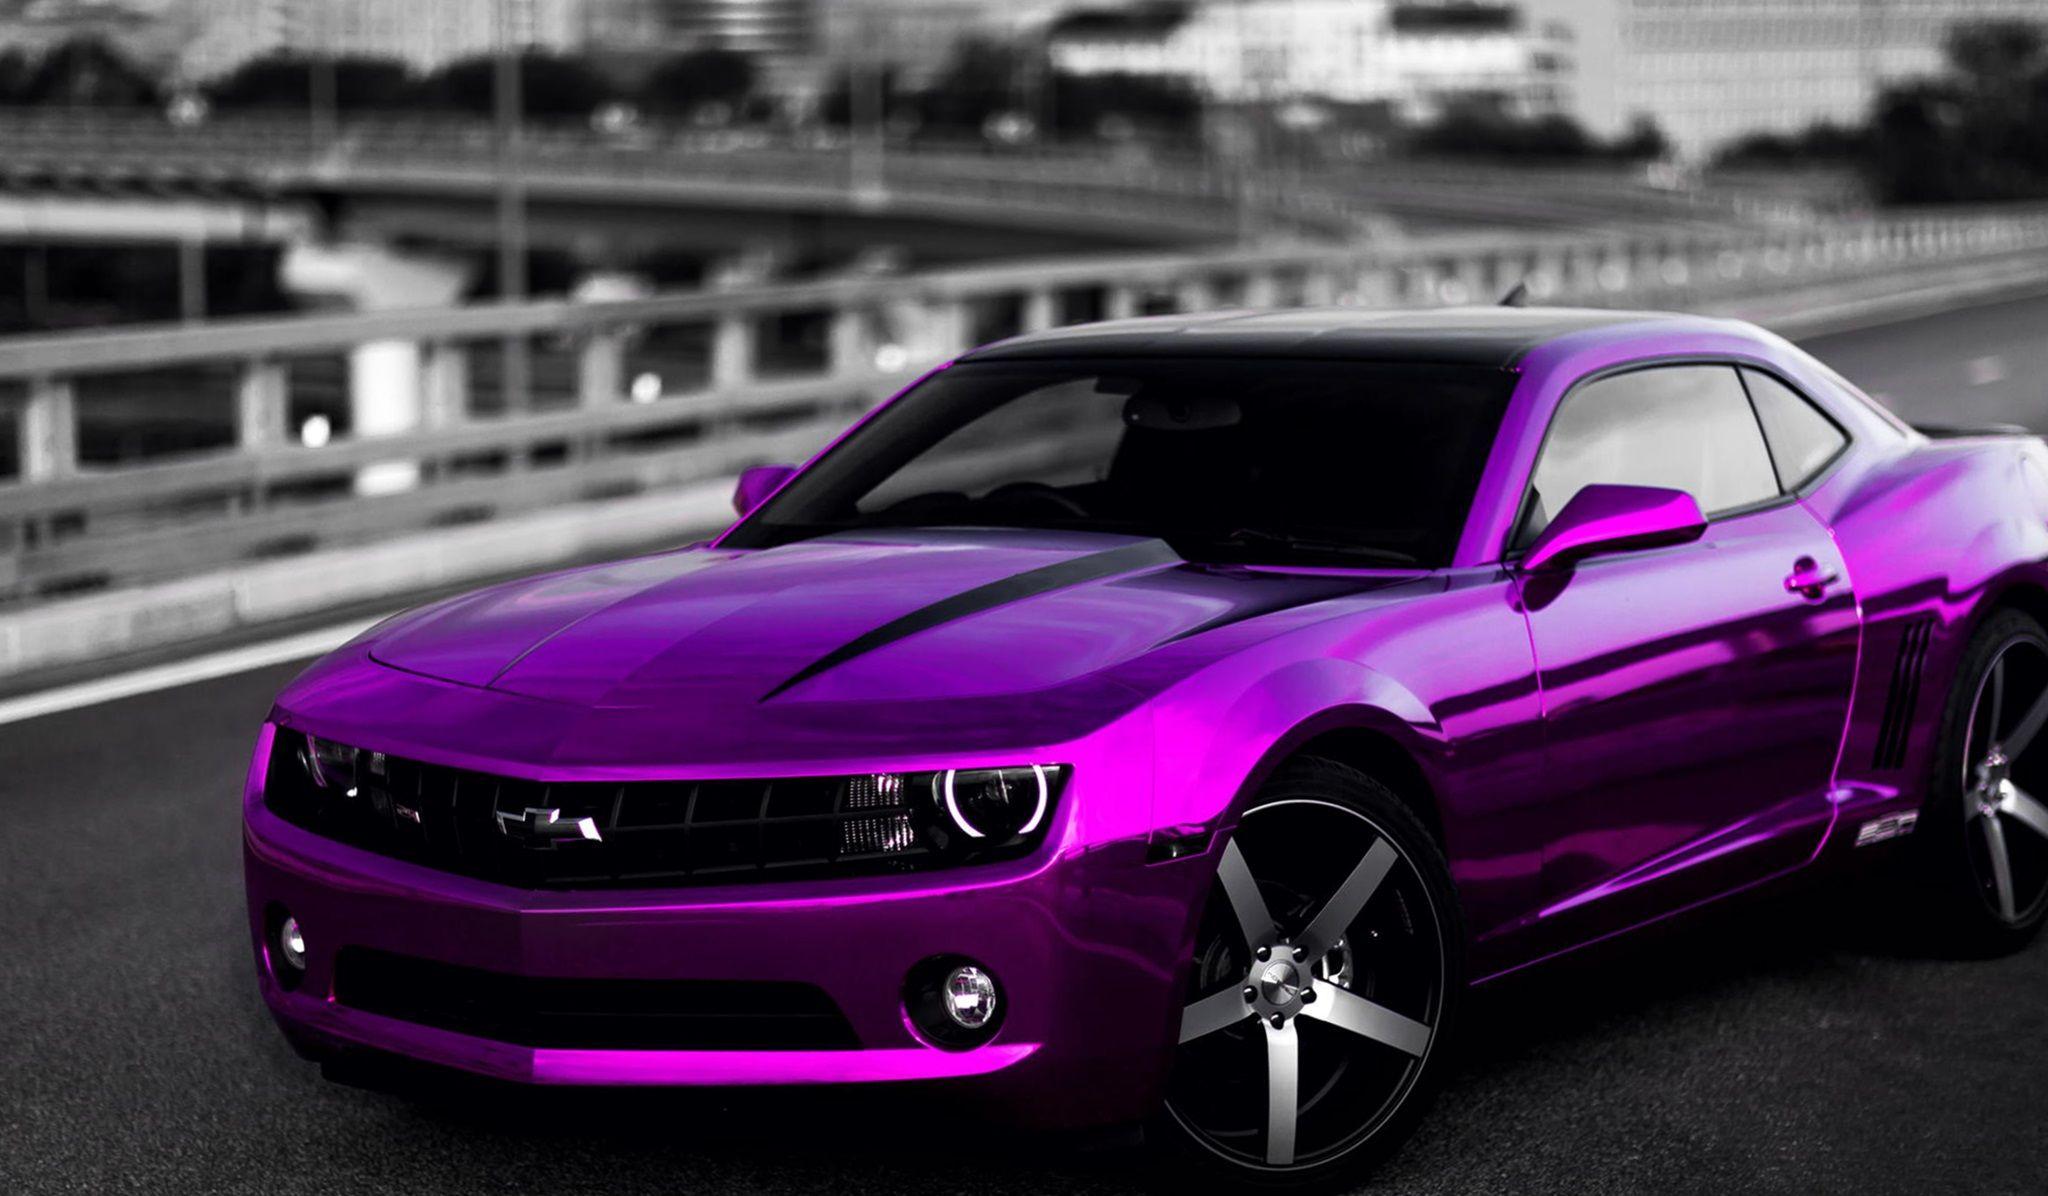 You can also upload and share your favorite pink and purple car desktop wal...